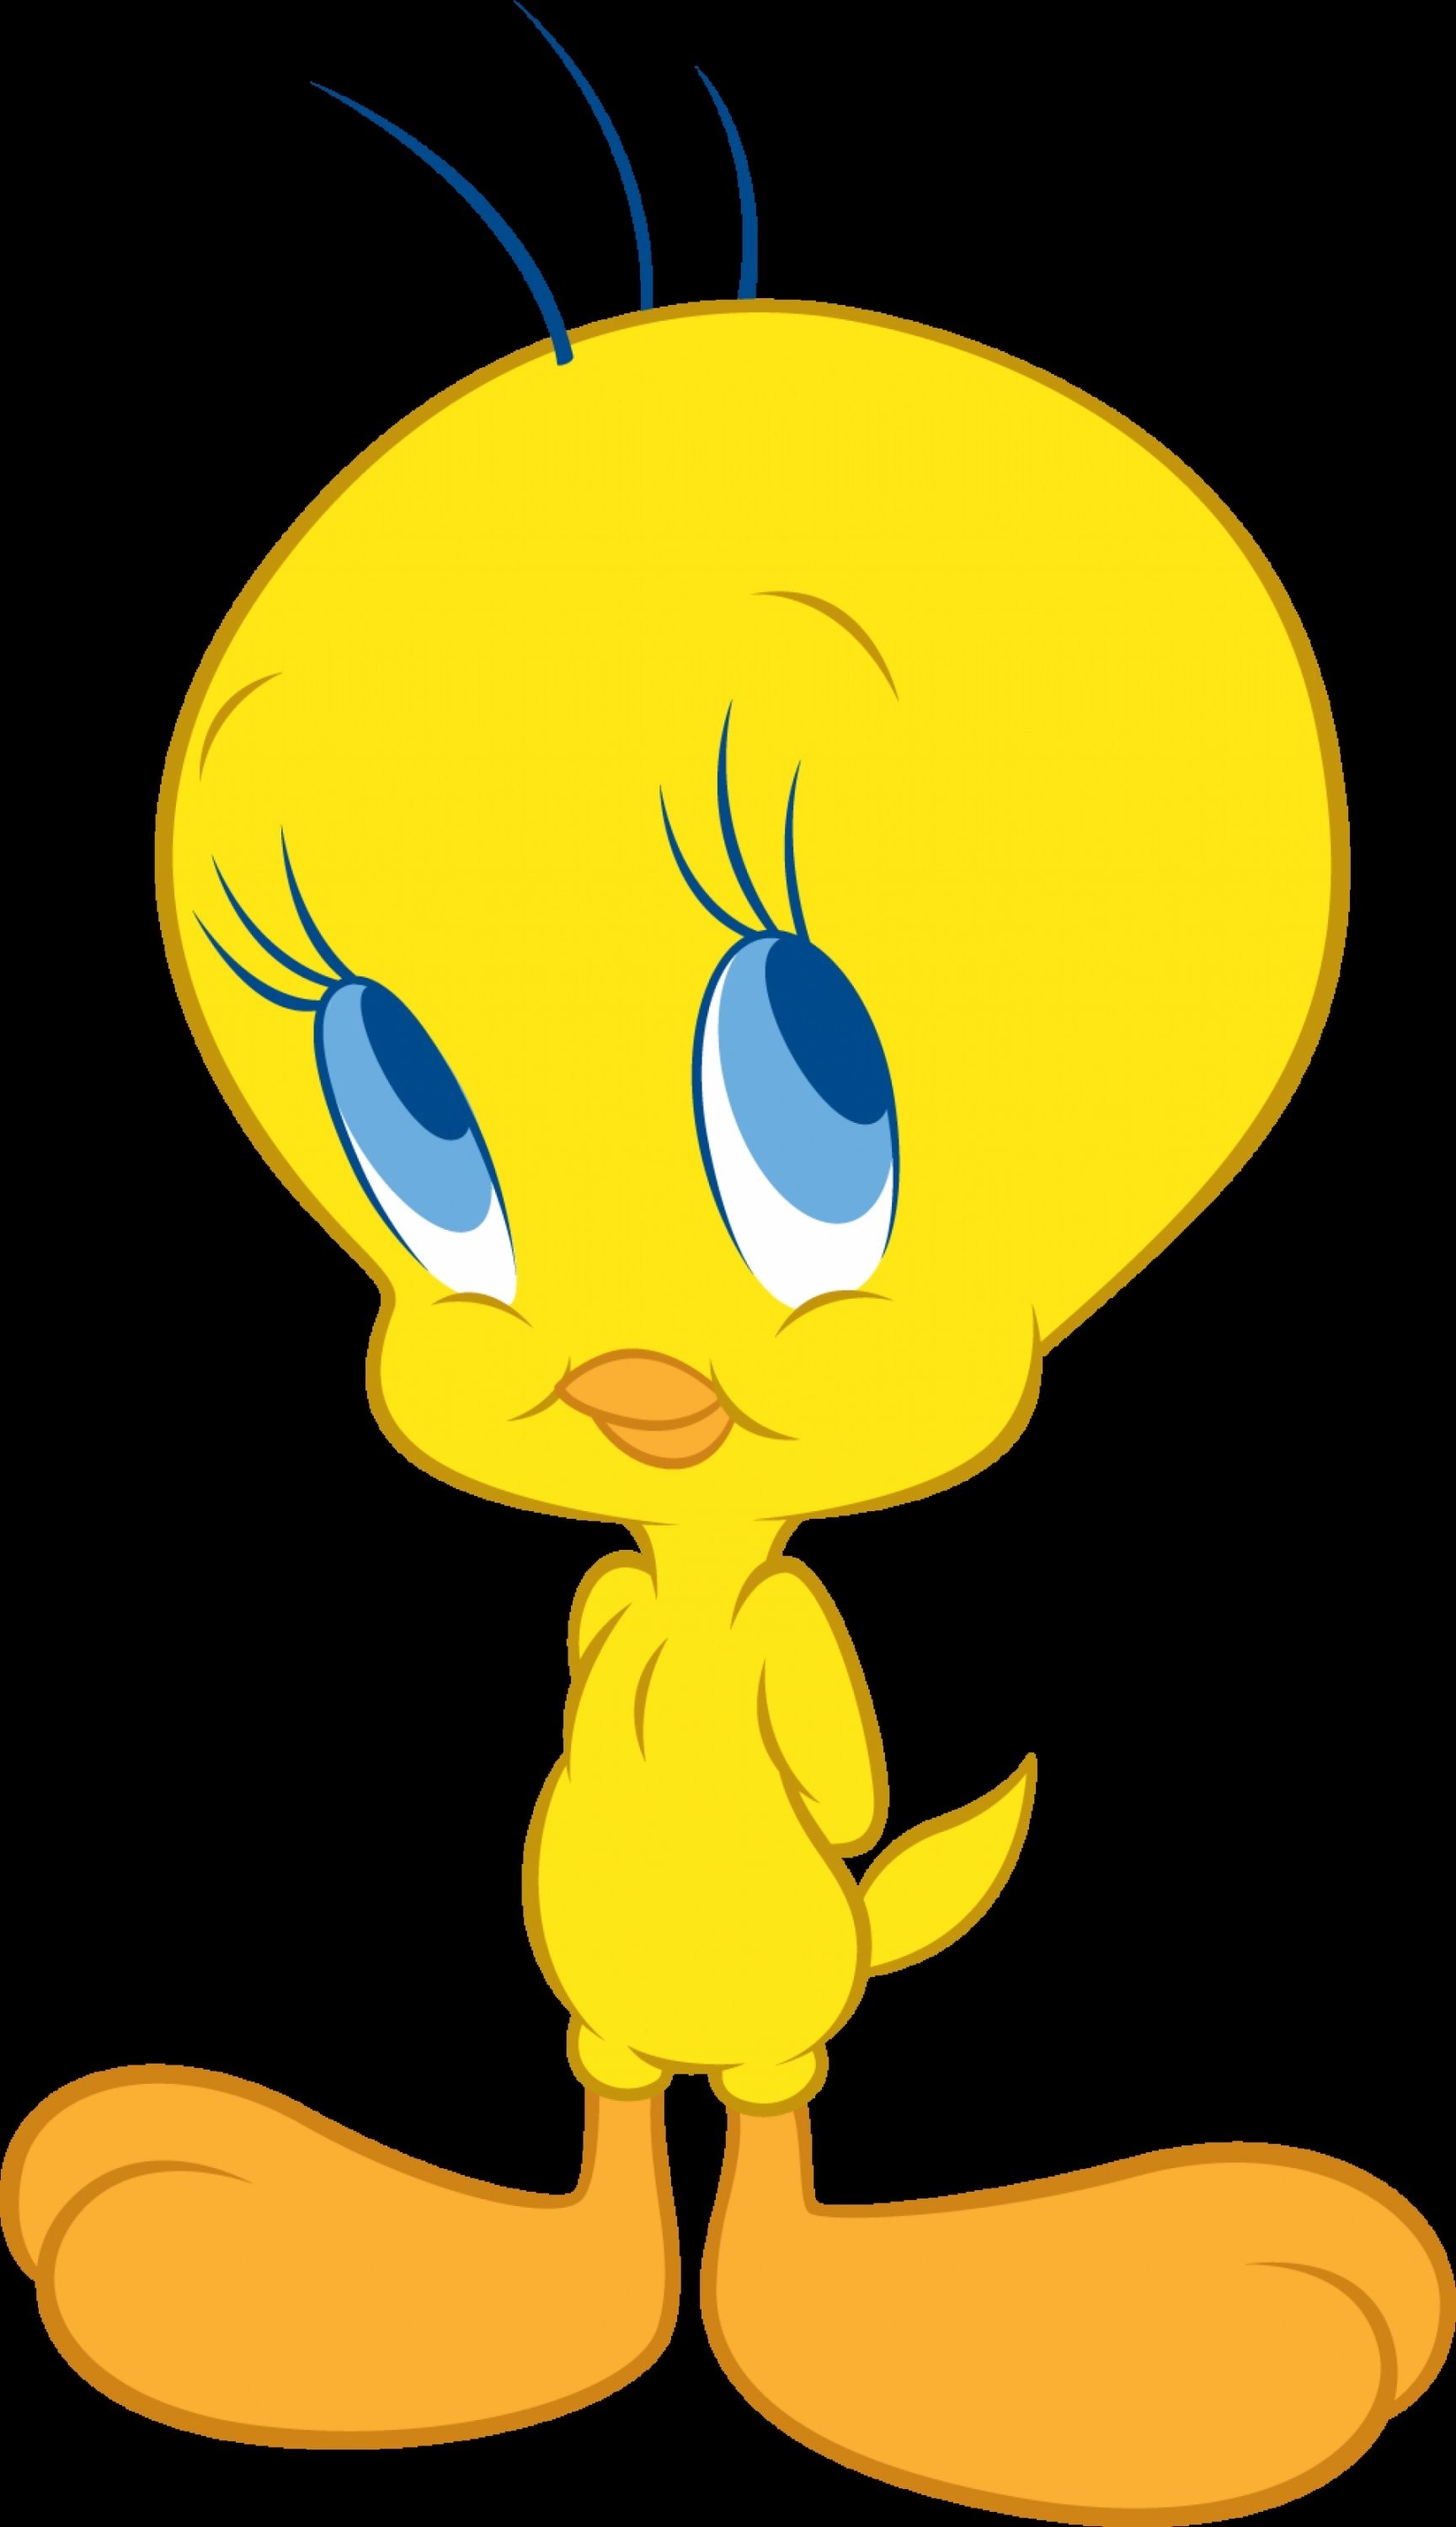 Wallpapers of Tweety (65+ images)